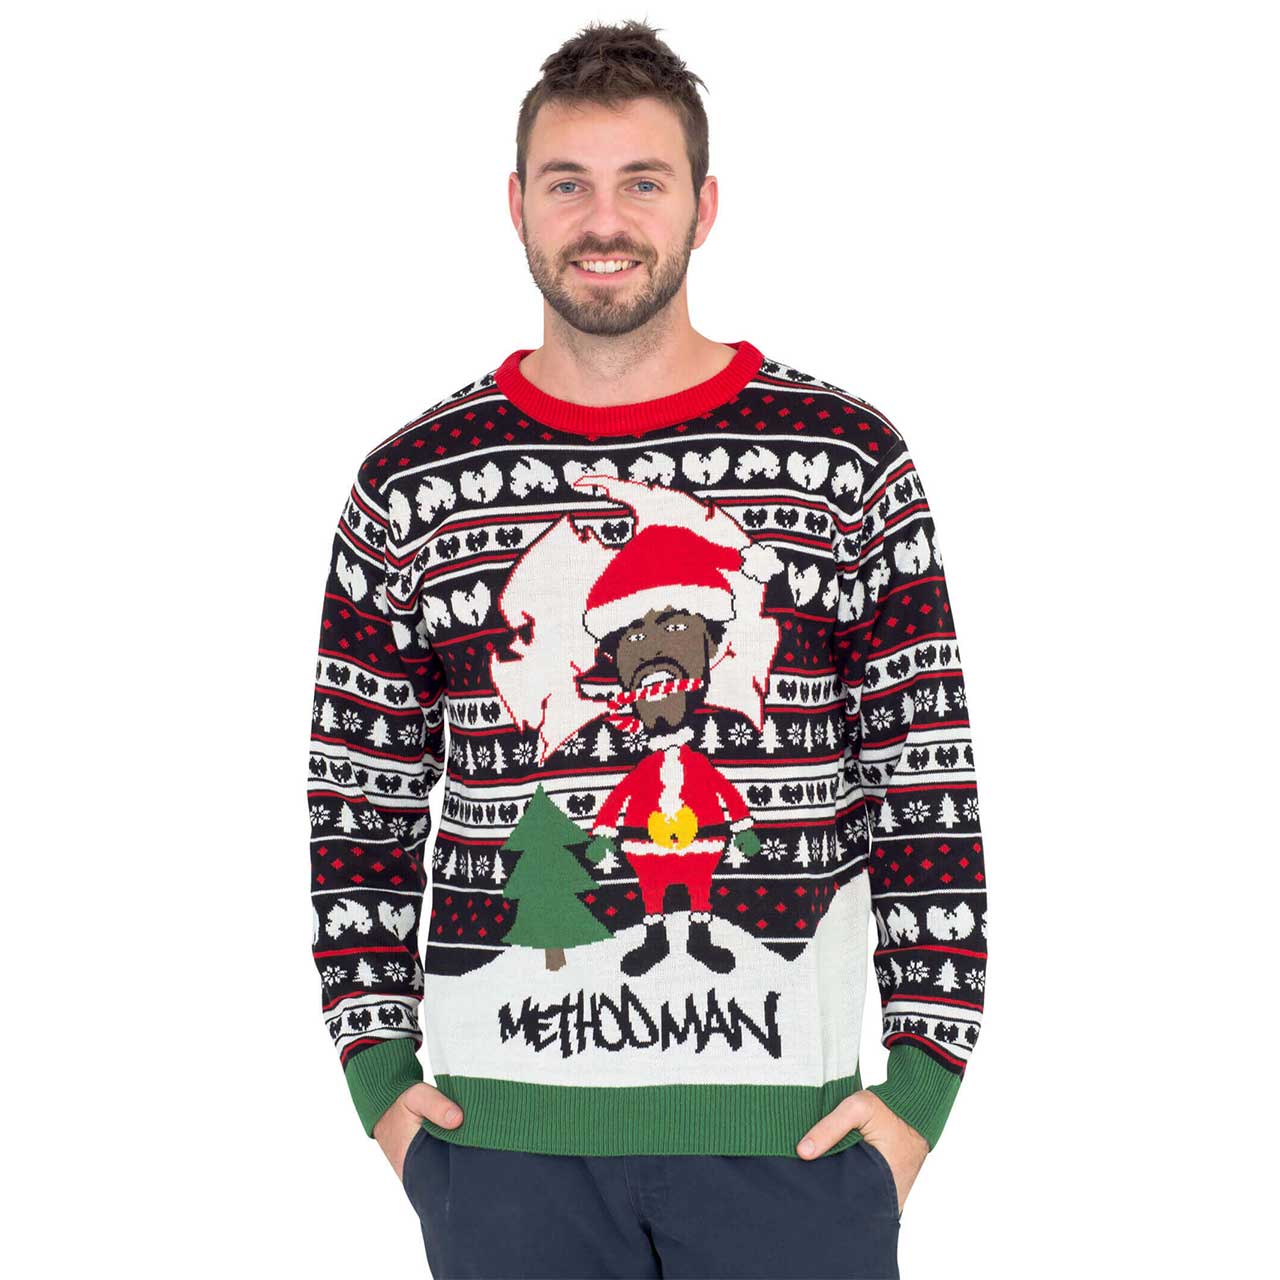 Method Man Ugly Christmas Sweater,New Products : uglyschristmassweater.com